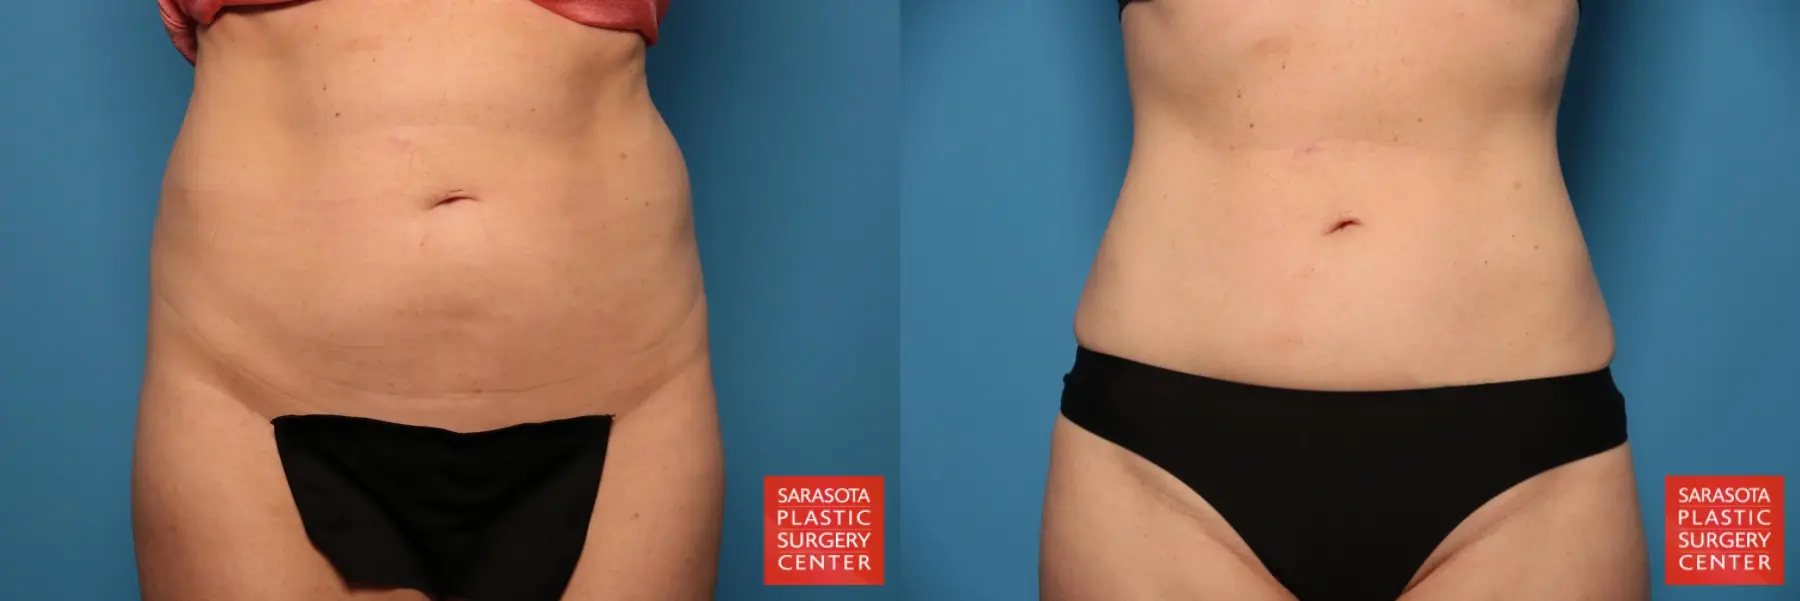 Liposuction: Patient 11 - Before and After  